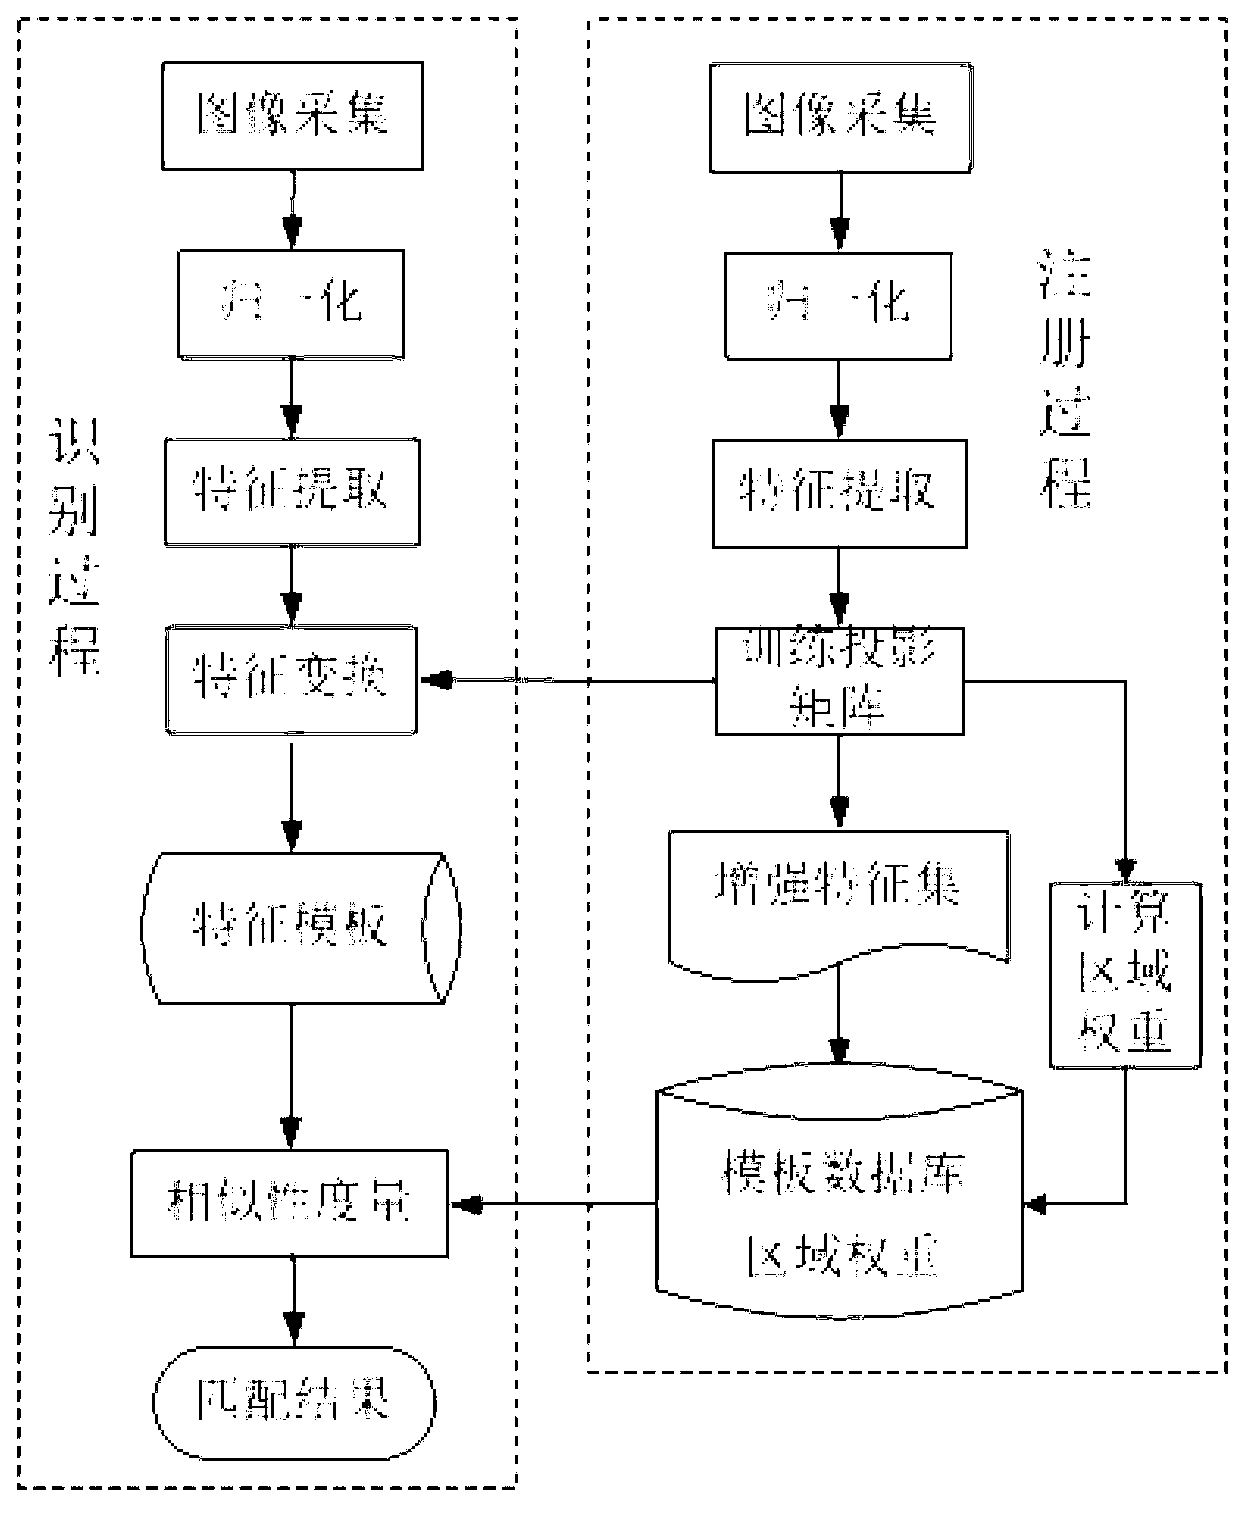 Human face recognizing method based on multi-level local obvious mode characteristic counting